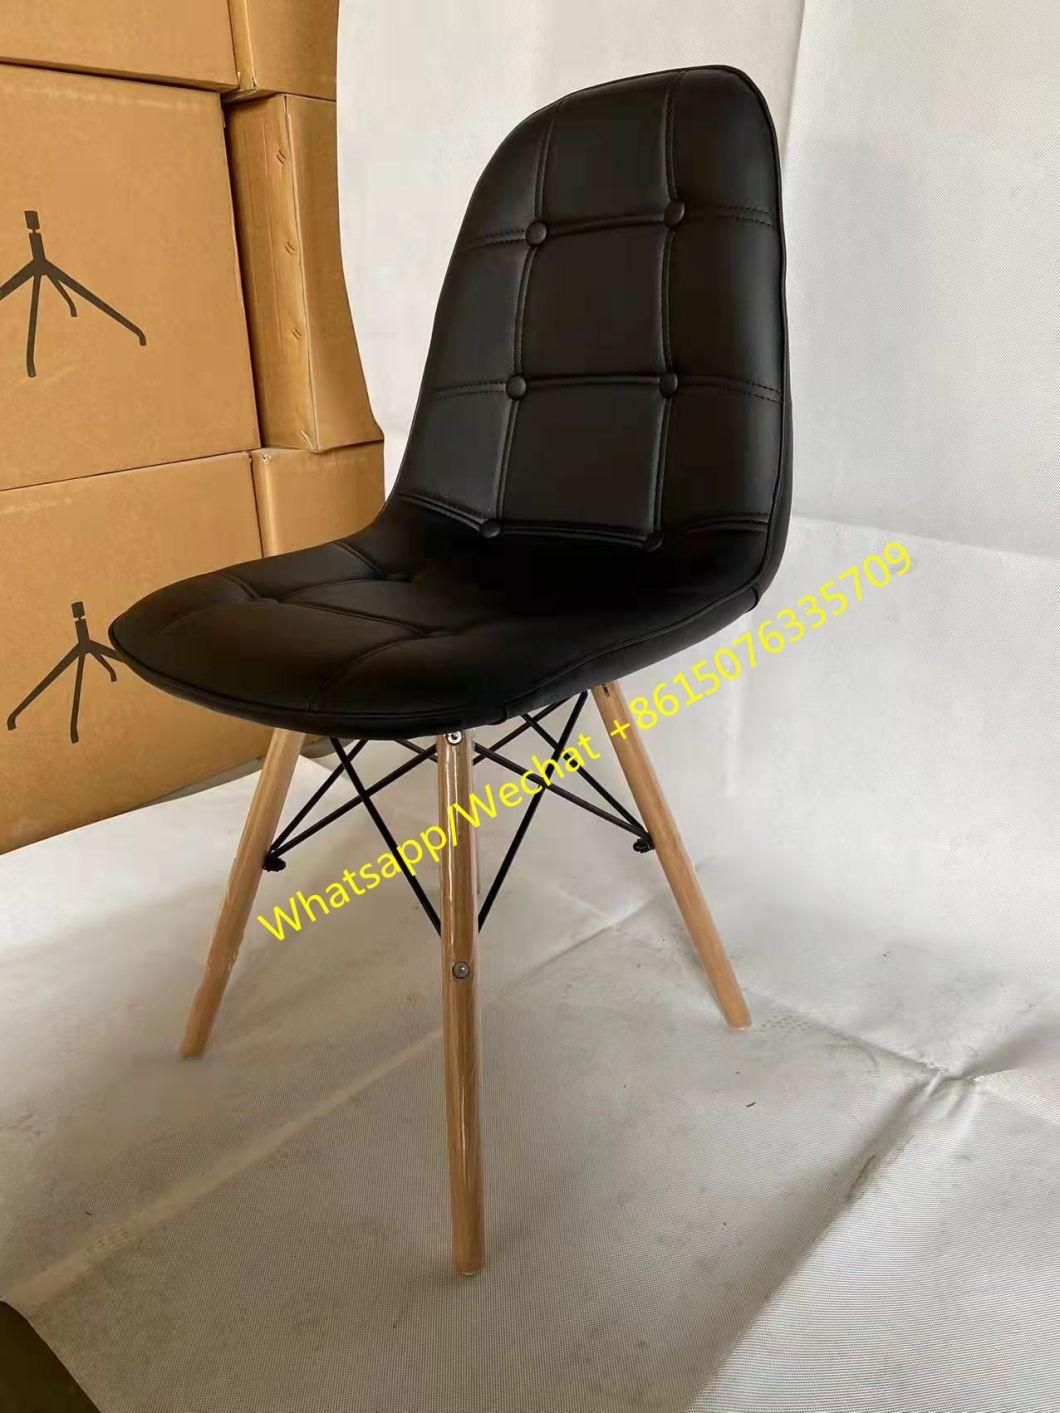 Hot Selling Modern Design Button Chair Leather Chair PU Leisure Chair for Living Room